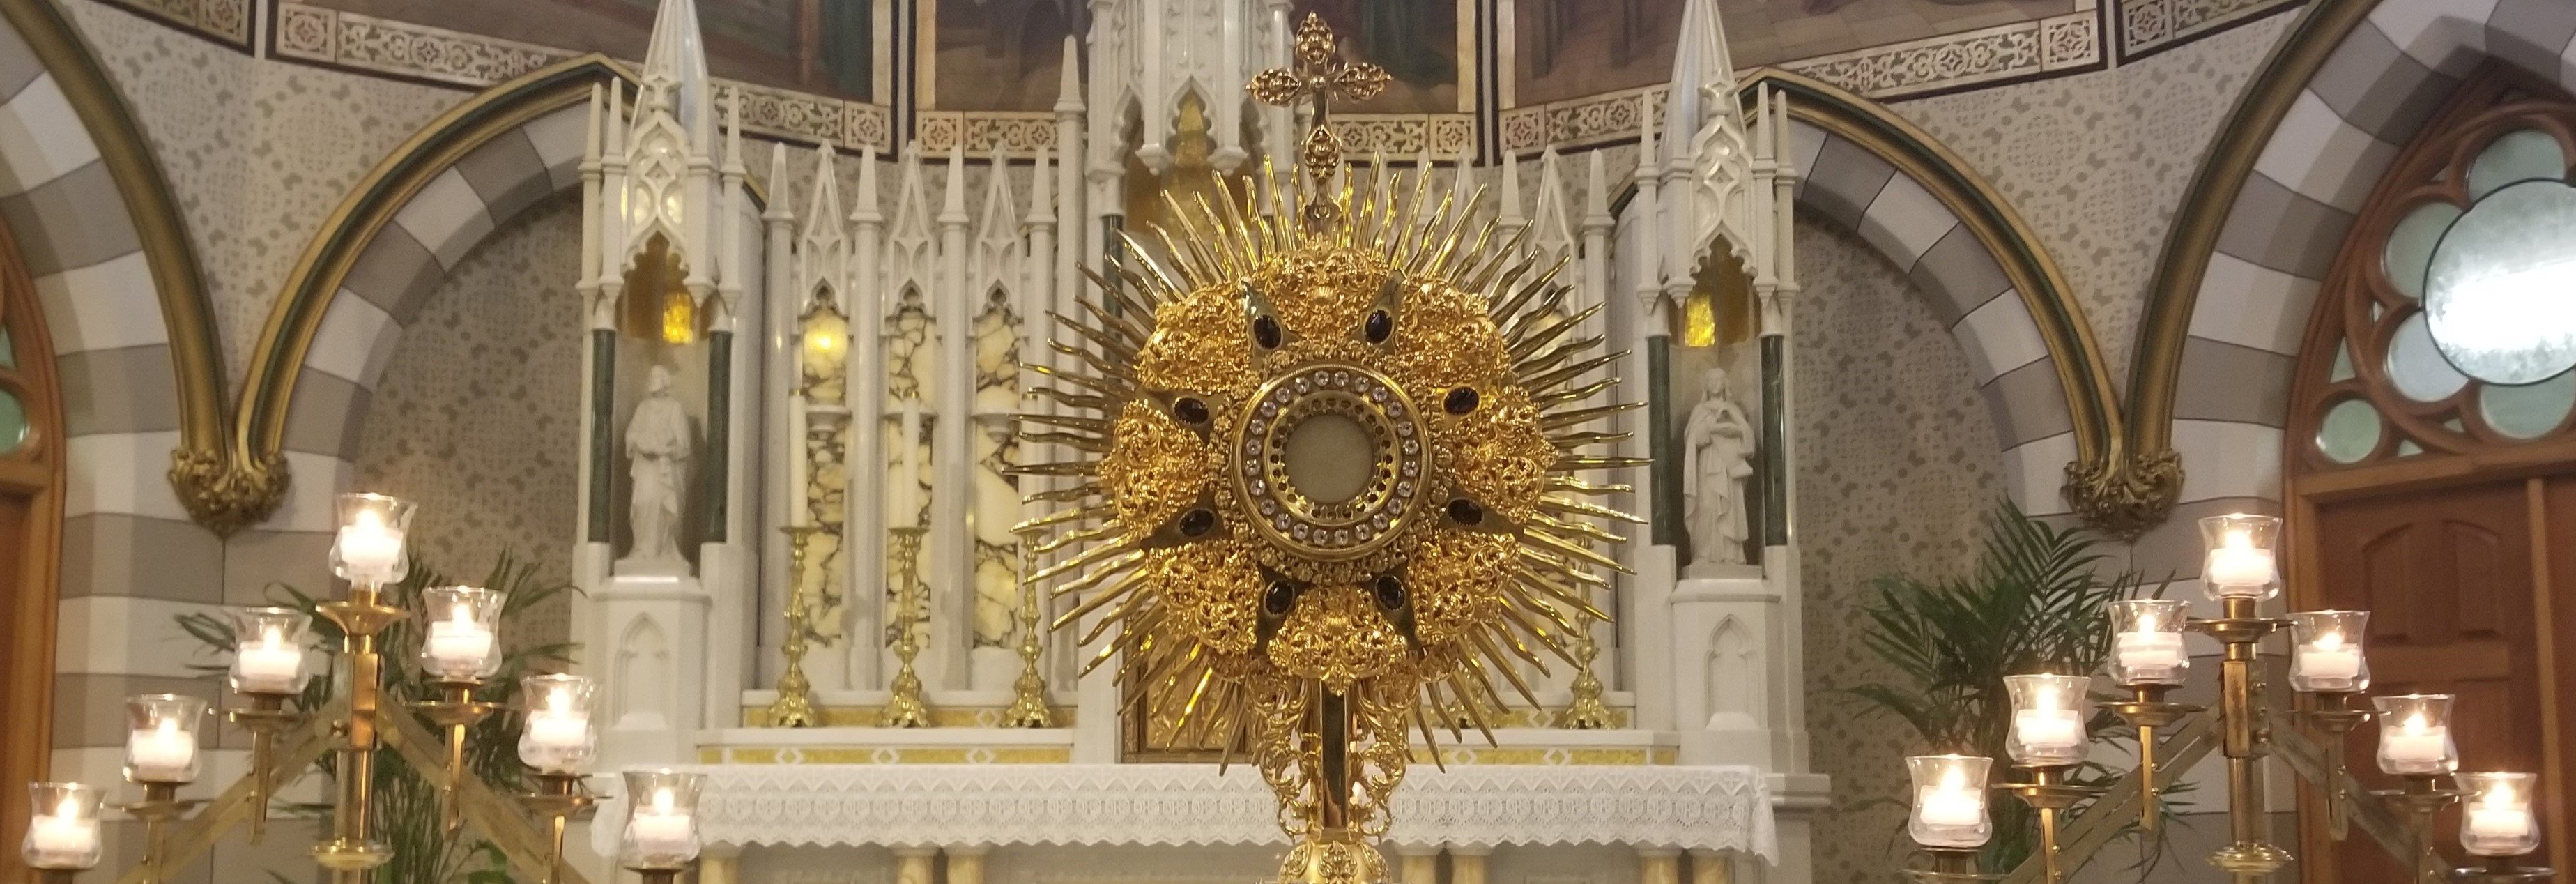 Blessed sacrament exposed on the altar